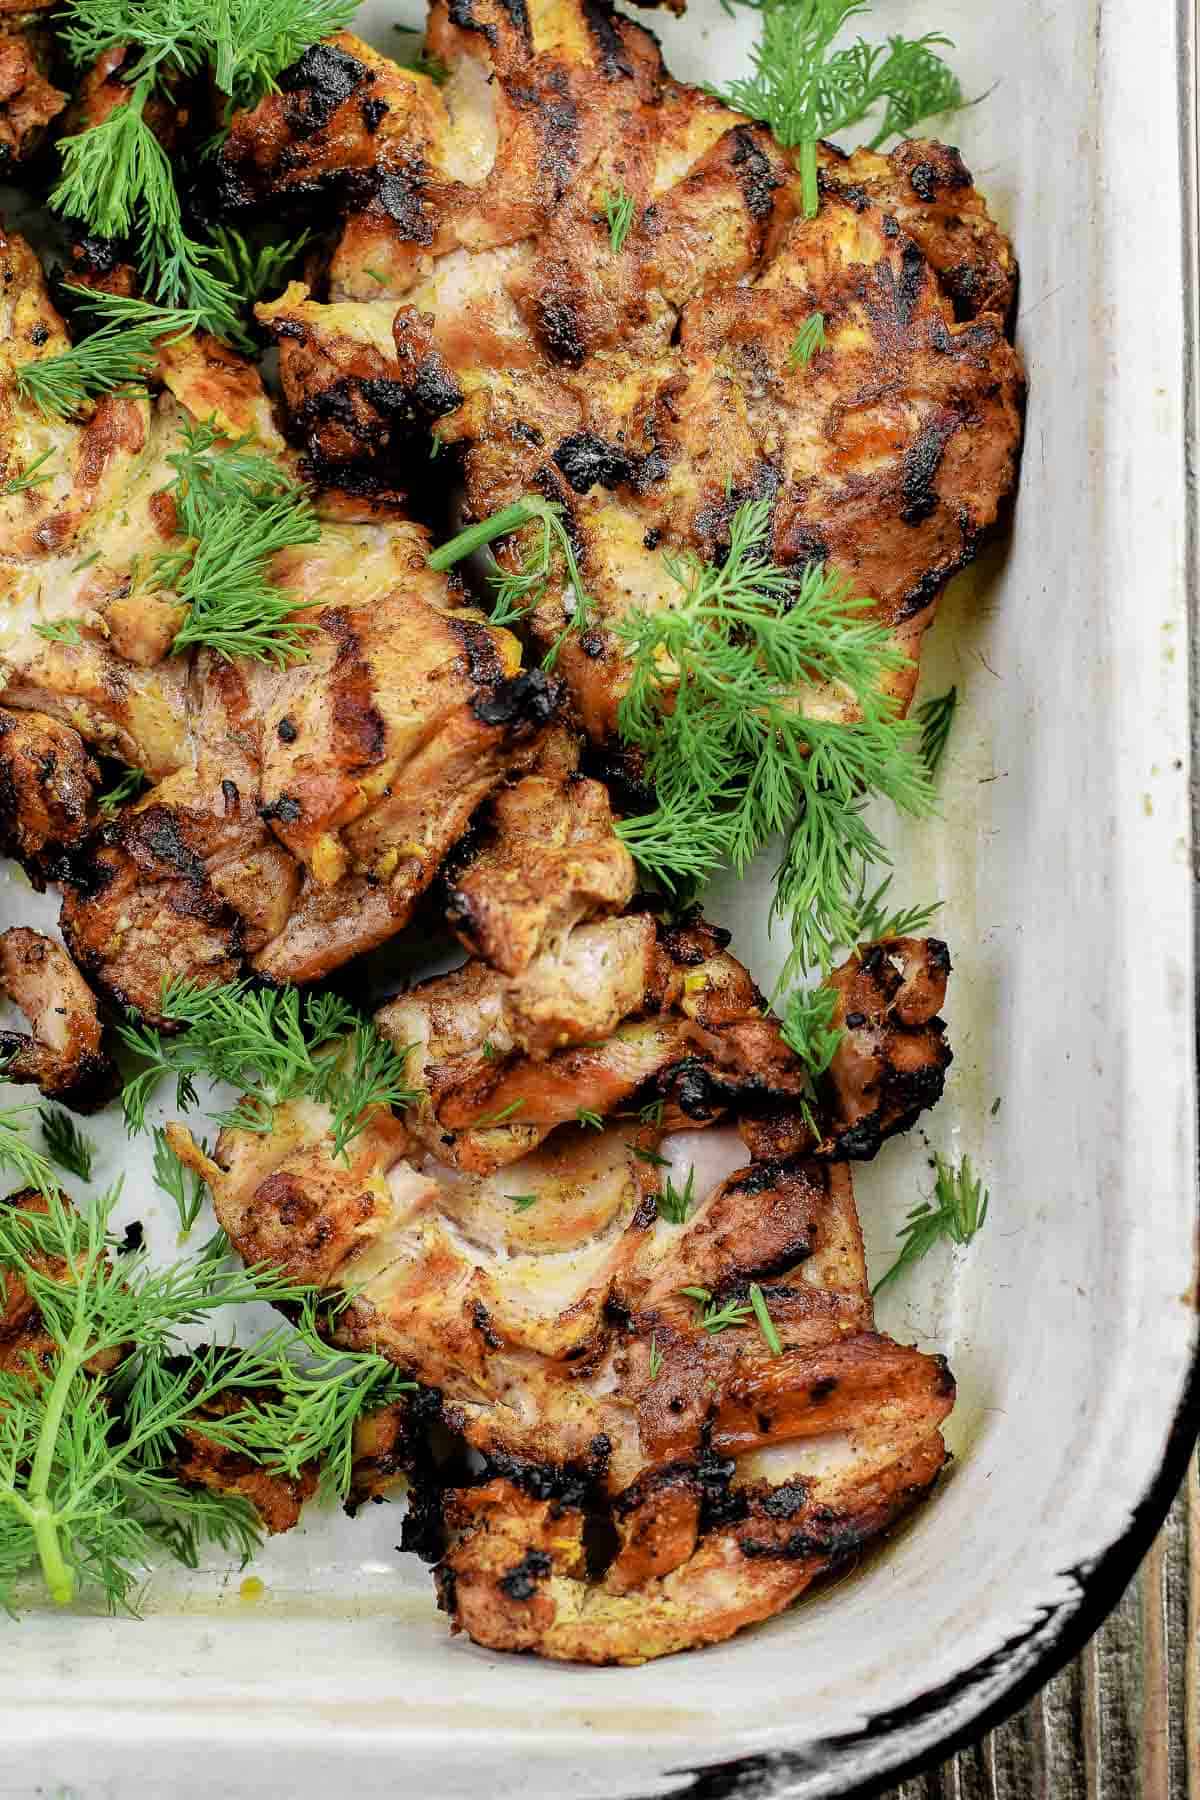 Grilled chicken pieces in a white tray, garnished with fresh dill